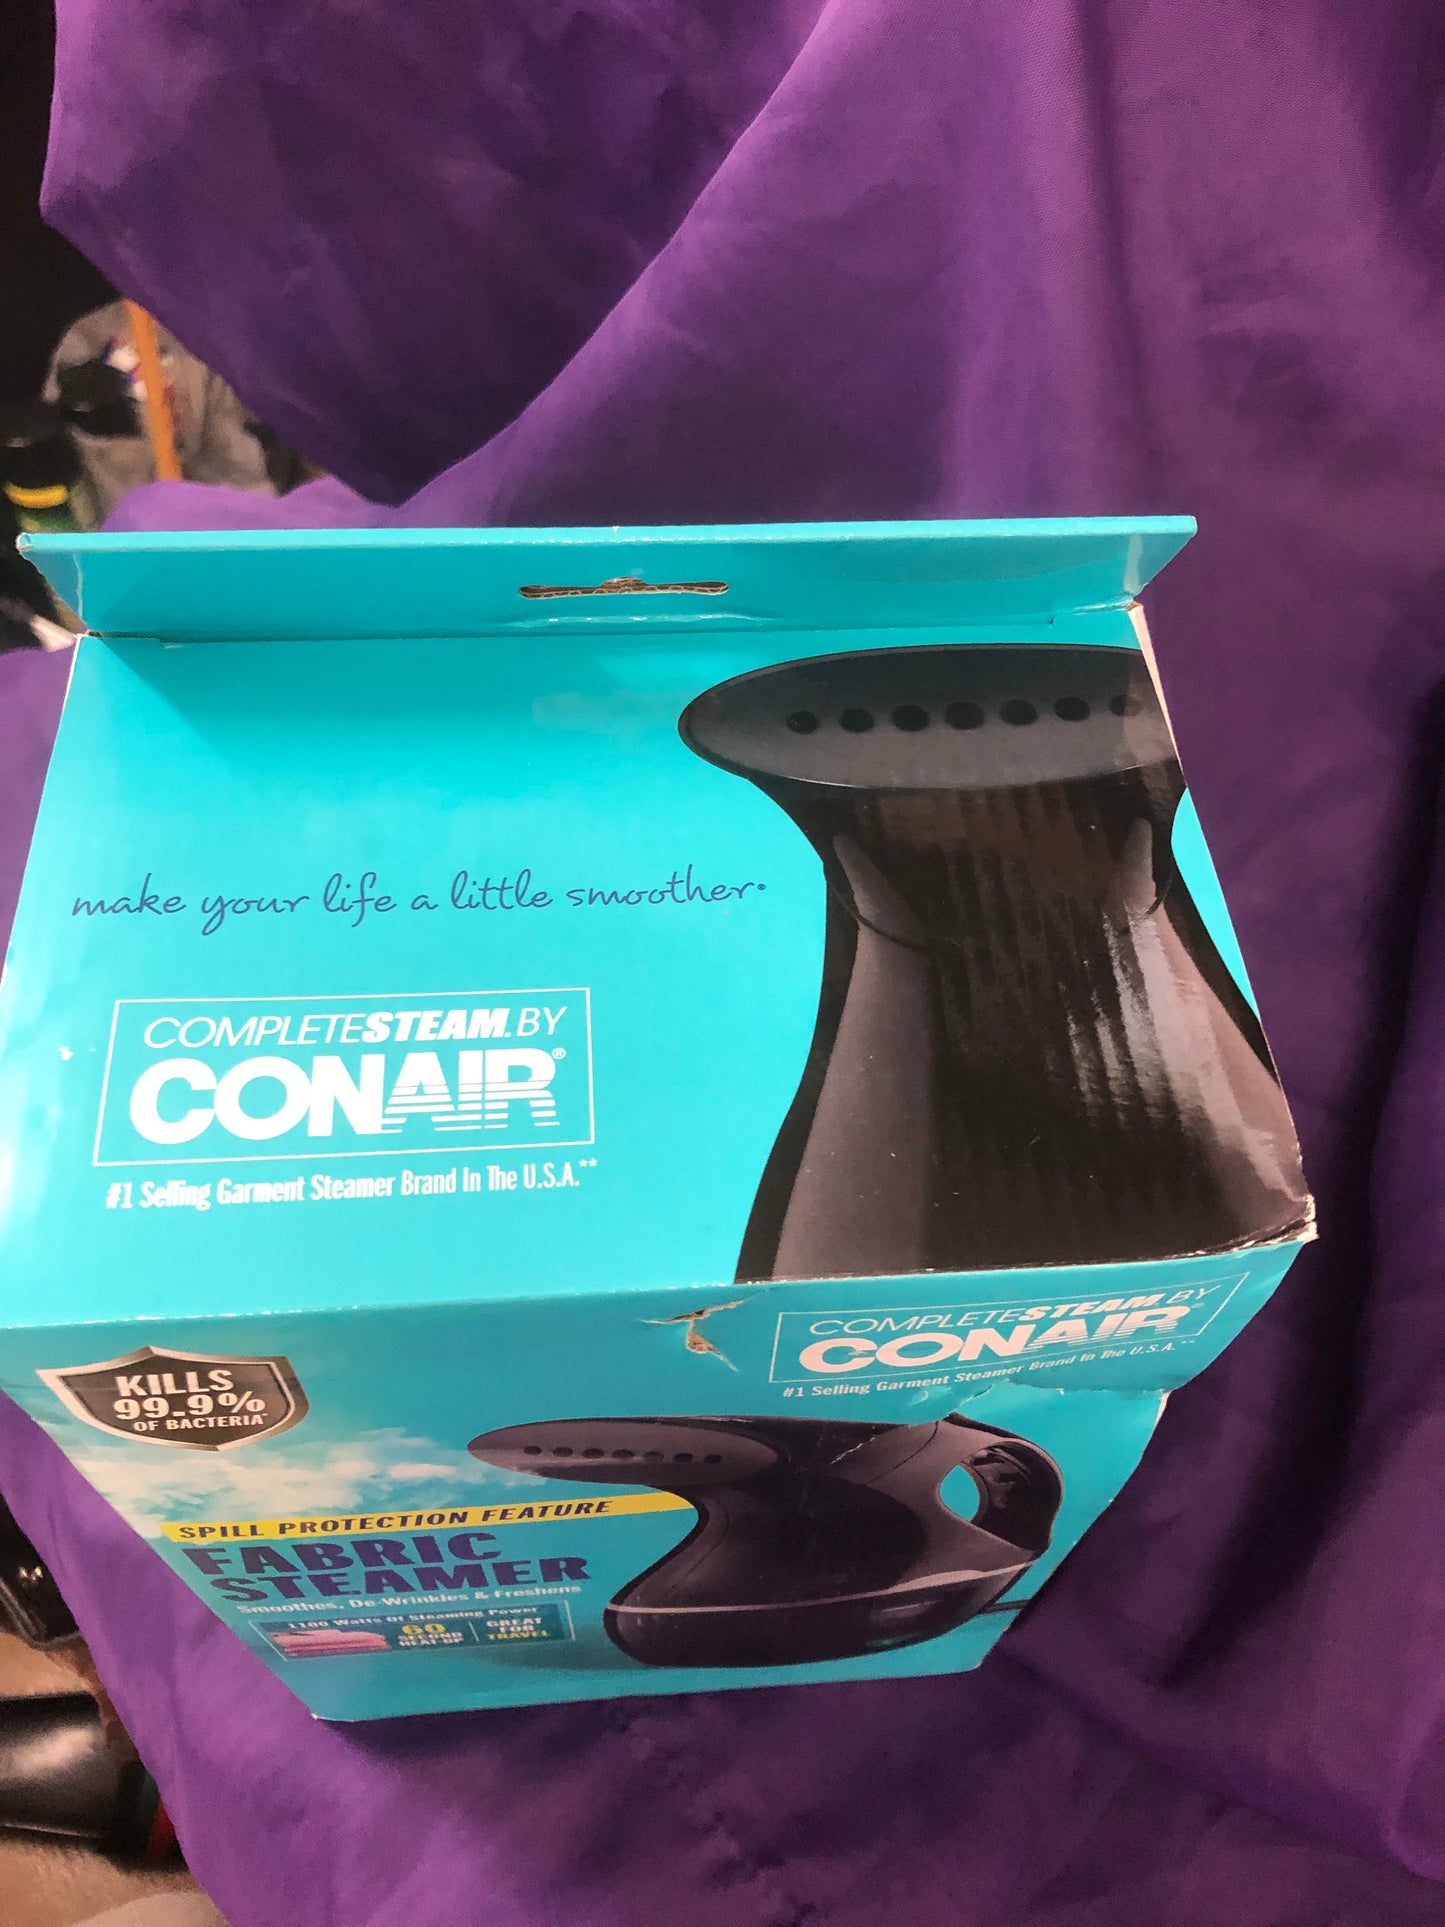 Conair Handheld Travel Garment Steamer for Clothes, CompleteSteam 1100W, For Home, Office and Travel 'New Arrival"